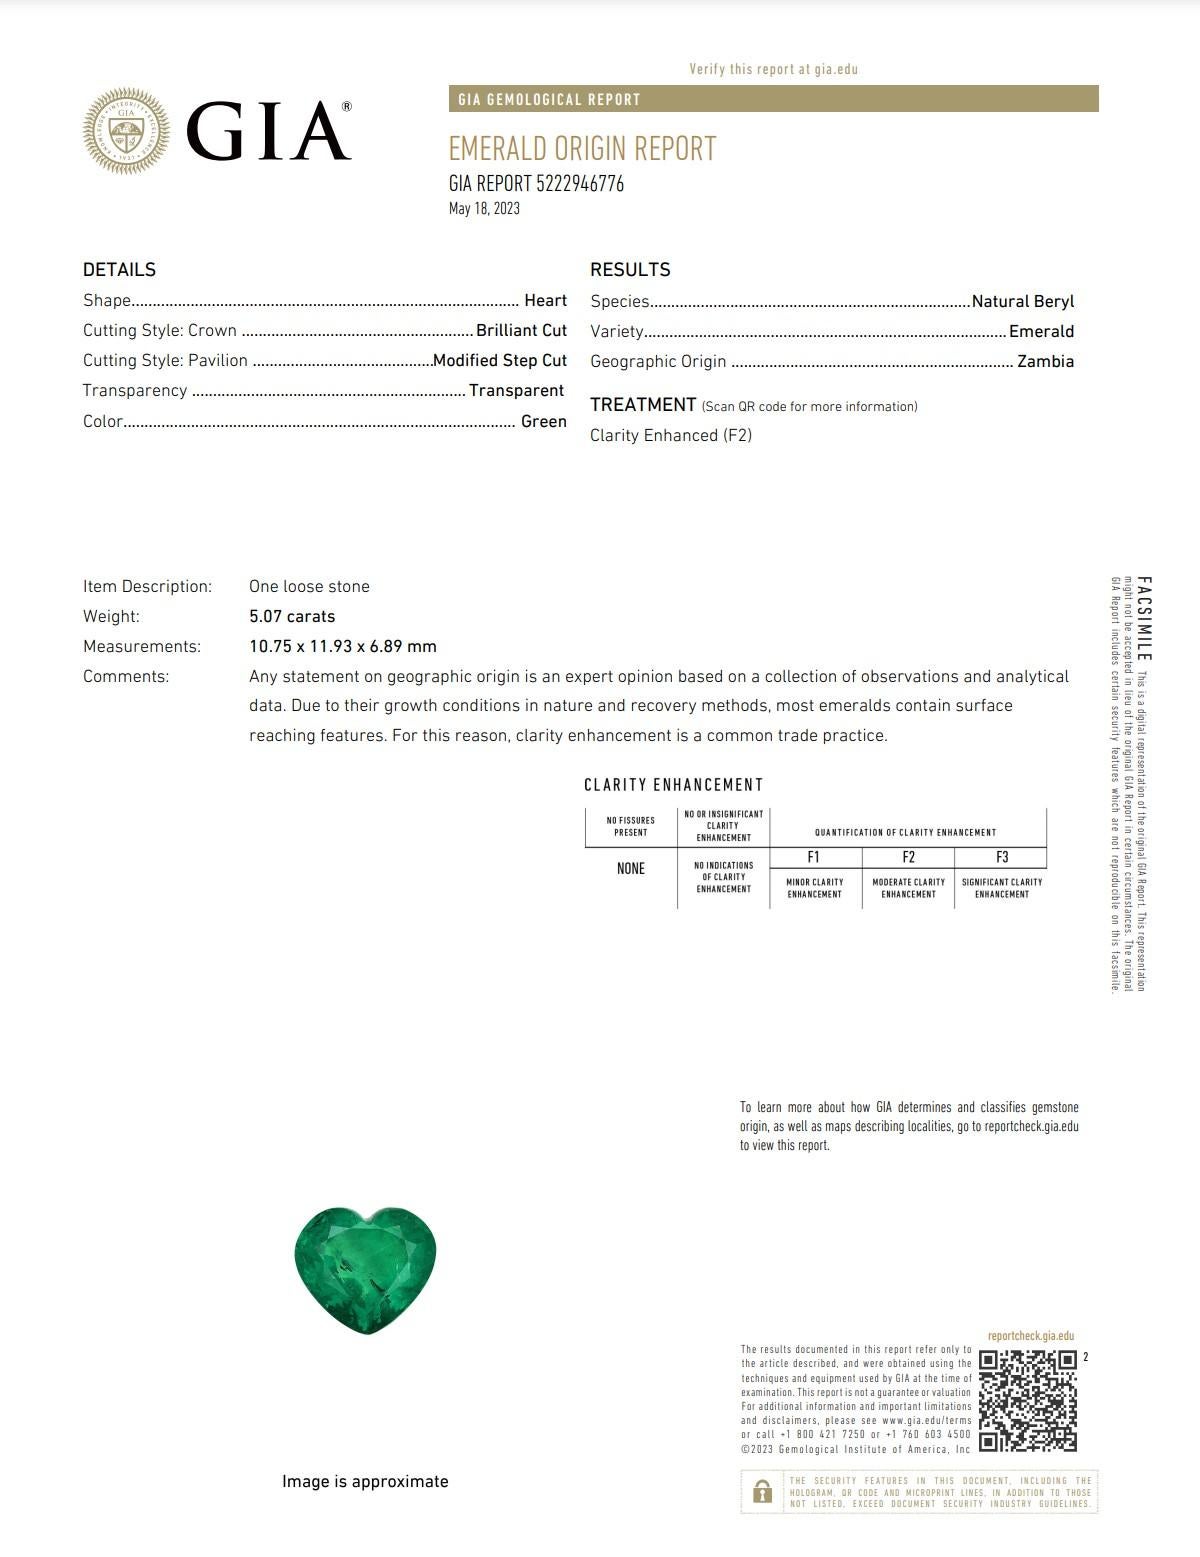 GIA certified heart shape emerald.

Very rare and exceptional vivid green emerald, cut in the shape of a heart. This gemstone has been carved with very well proportions and have great intense color saturation. Emeralds with this quality with a